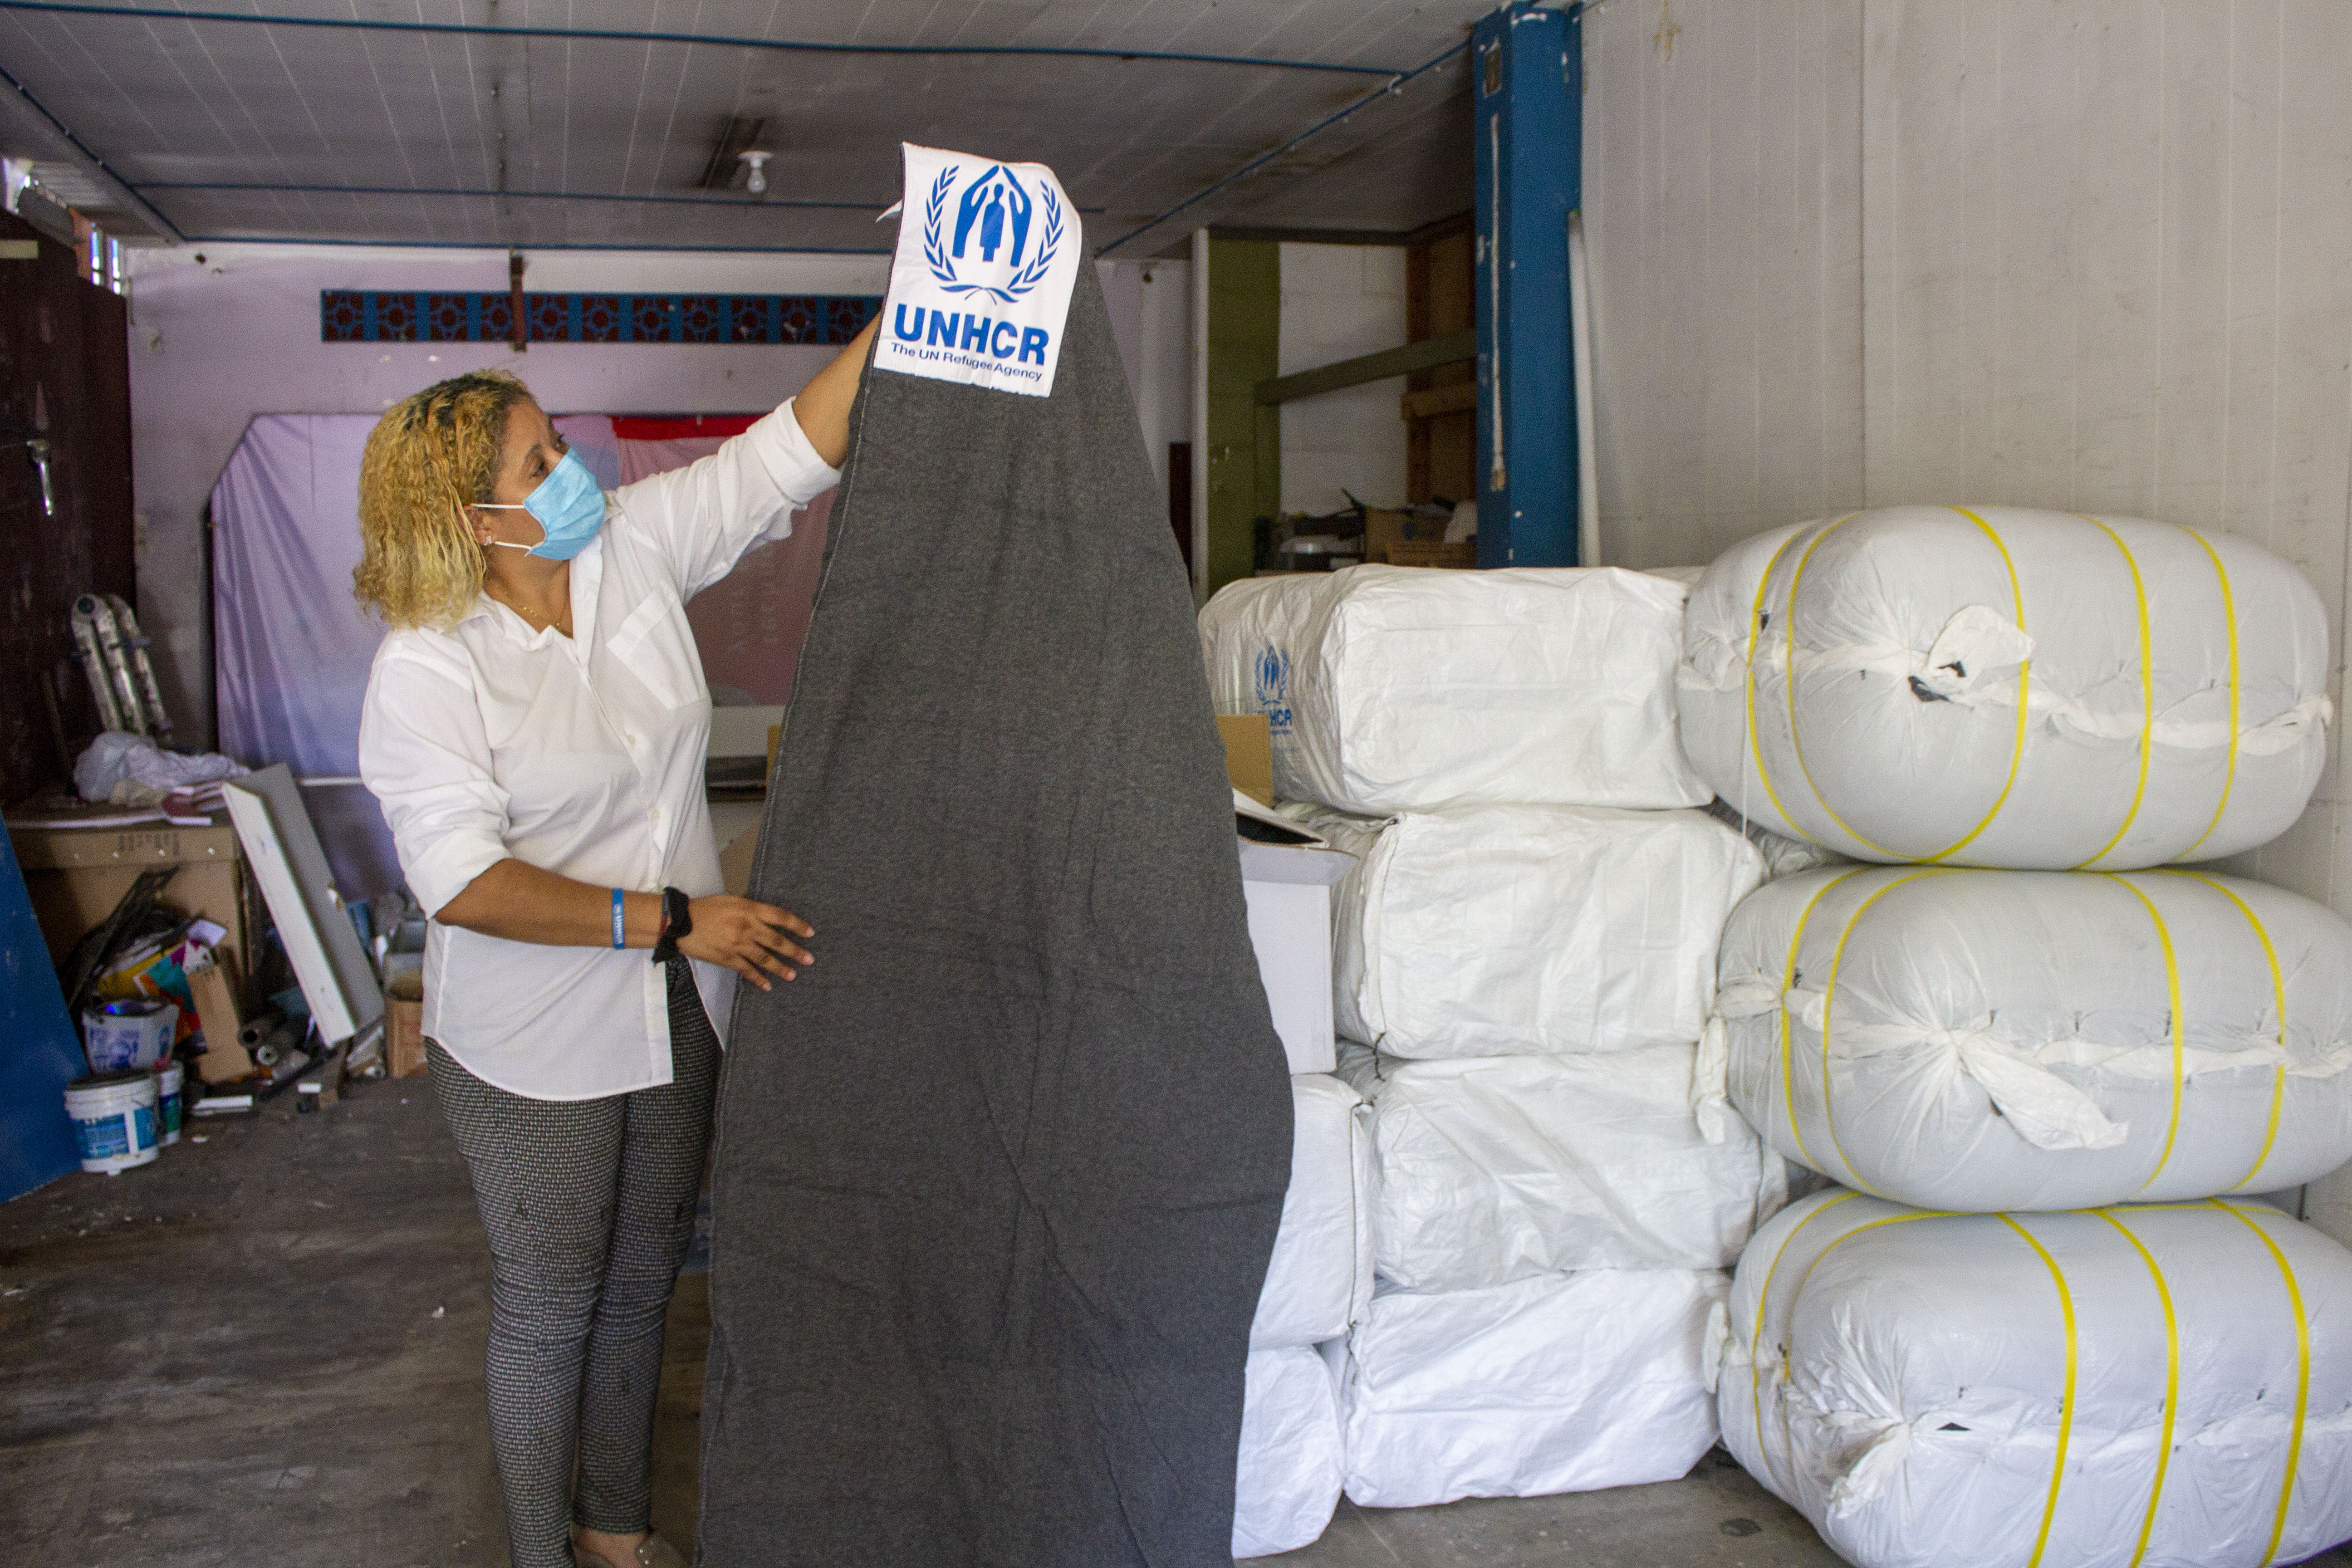 The founder of La Casita holds up a blanket donated by UNHCR